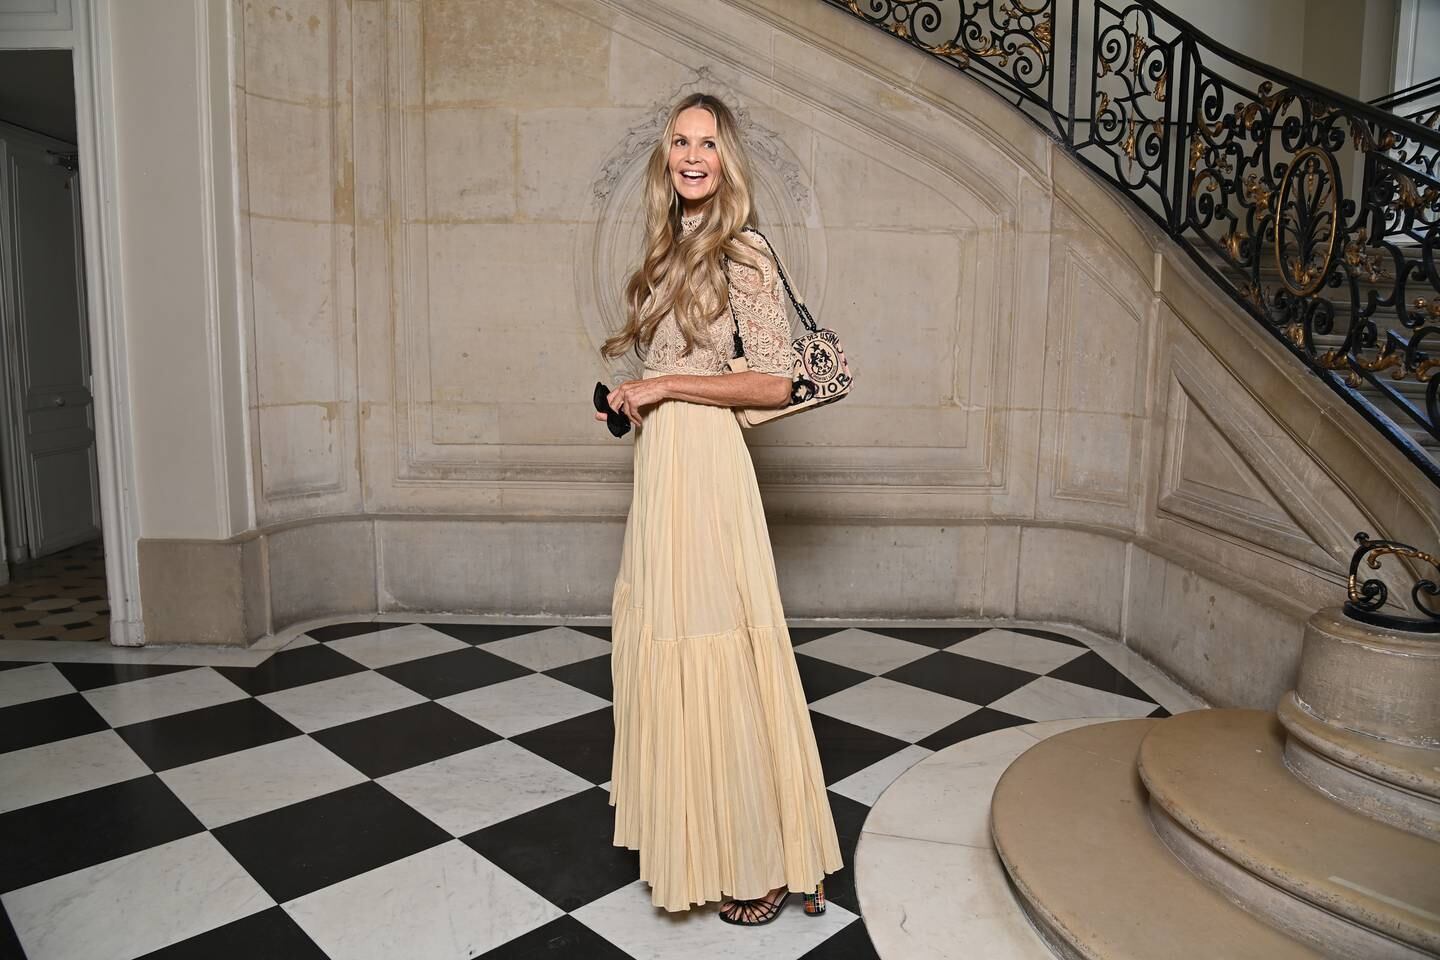 Elle Macpherson reveals she travels with a 'biohacking' bag and keeps a gratitude journal. Photo:  Pascal Le Segretain / Getty Images For Christian Dior